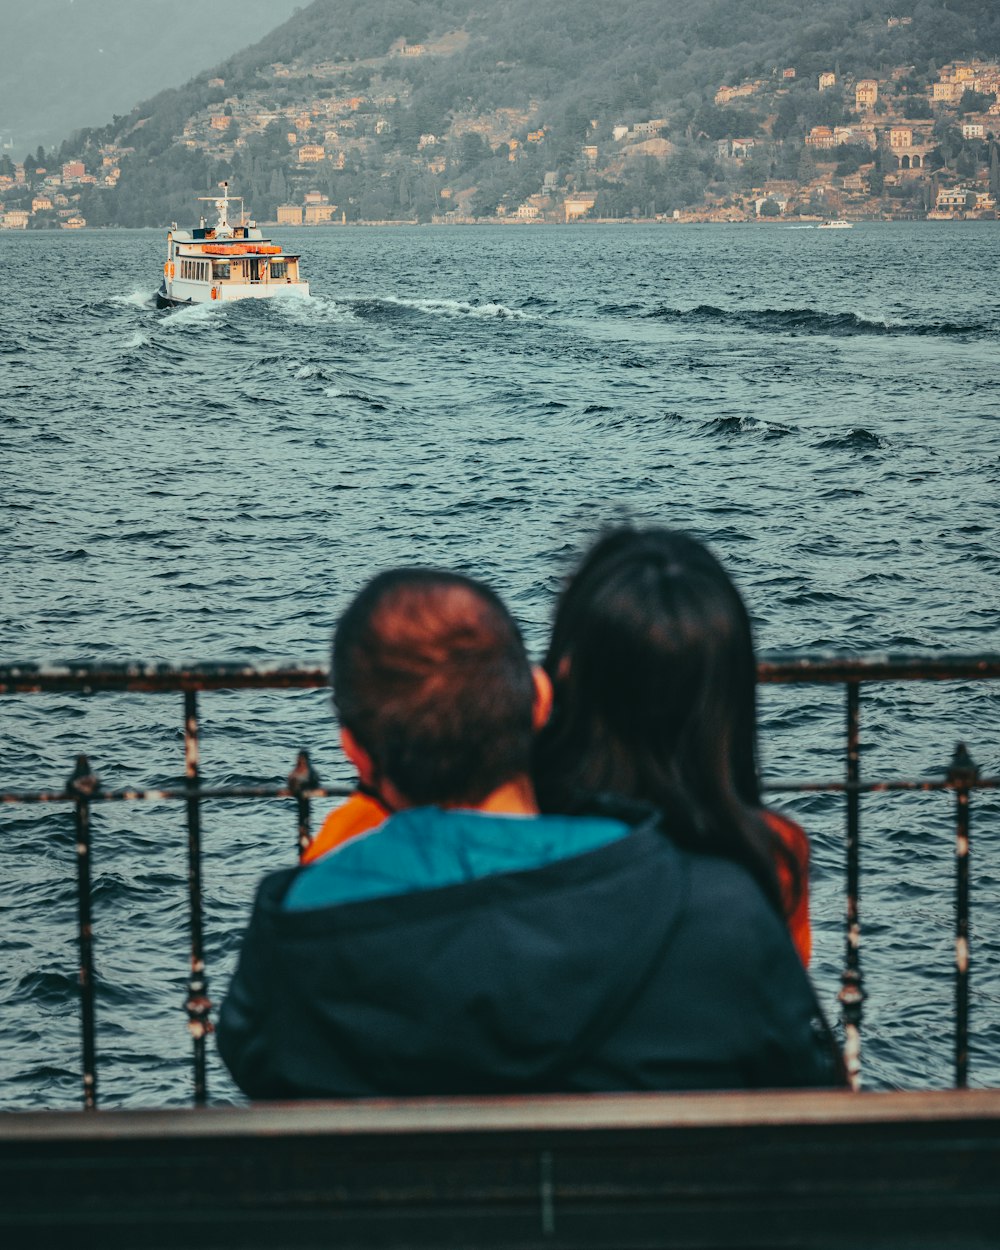 a man and a woman sitting on a bench looking at a boat in the water